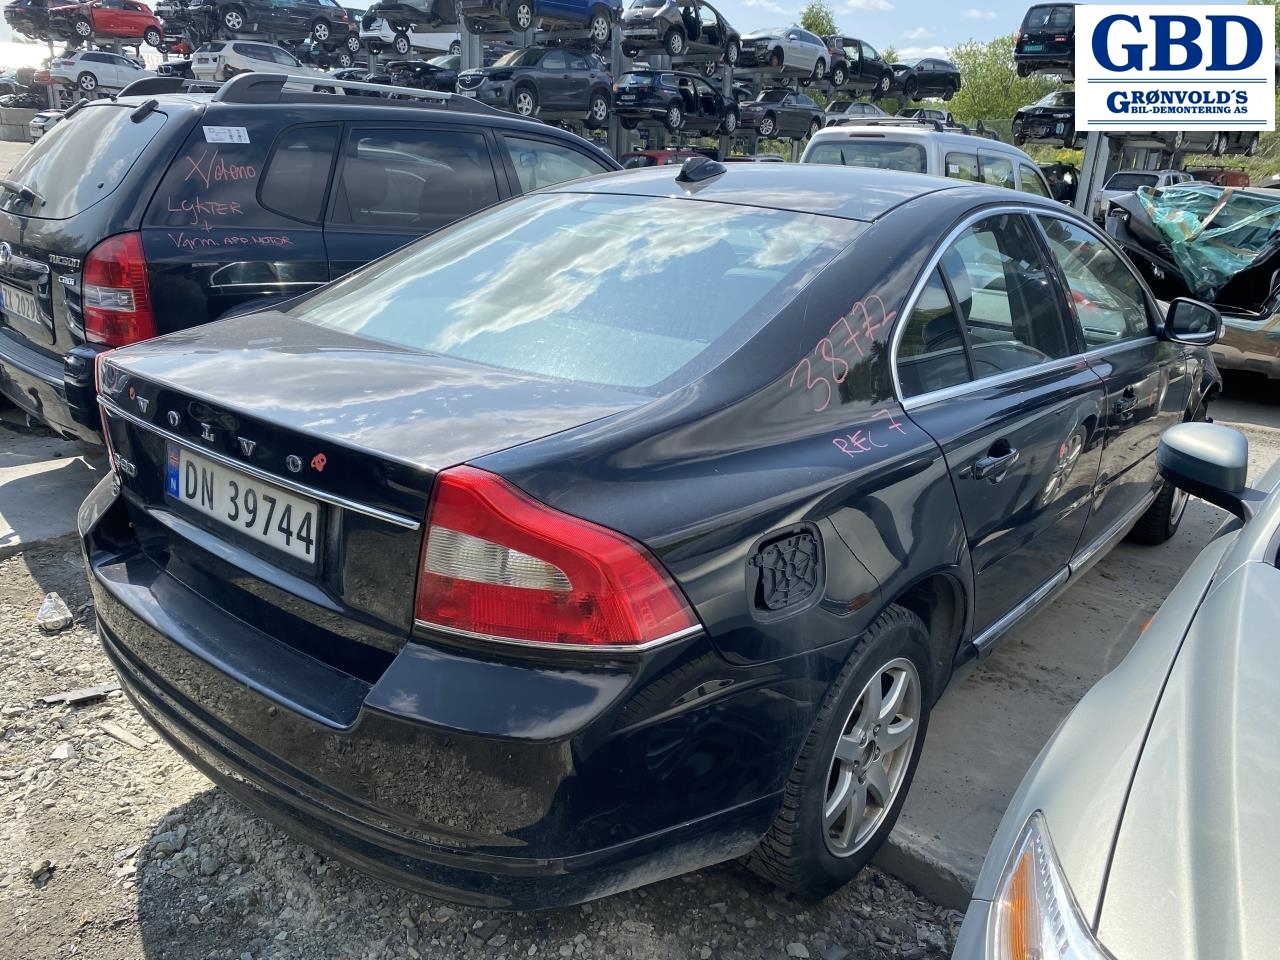 Volvo S80, 2006-2013 (Type II, Fase 1) parts car, Engine code: D4164T, Gearbox code: 1283123